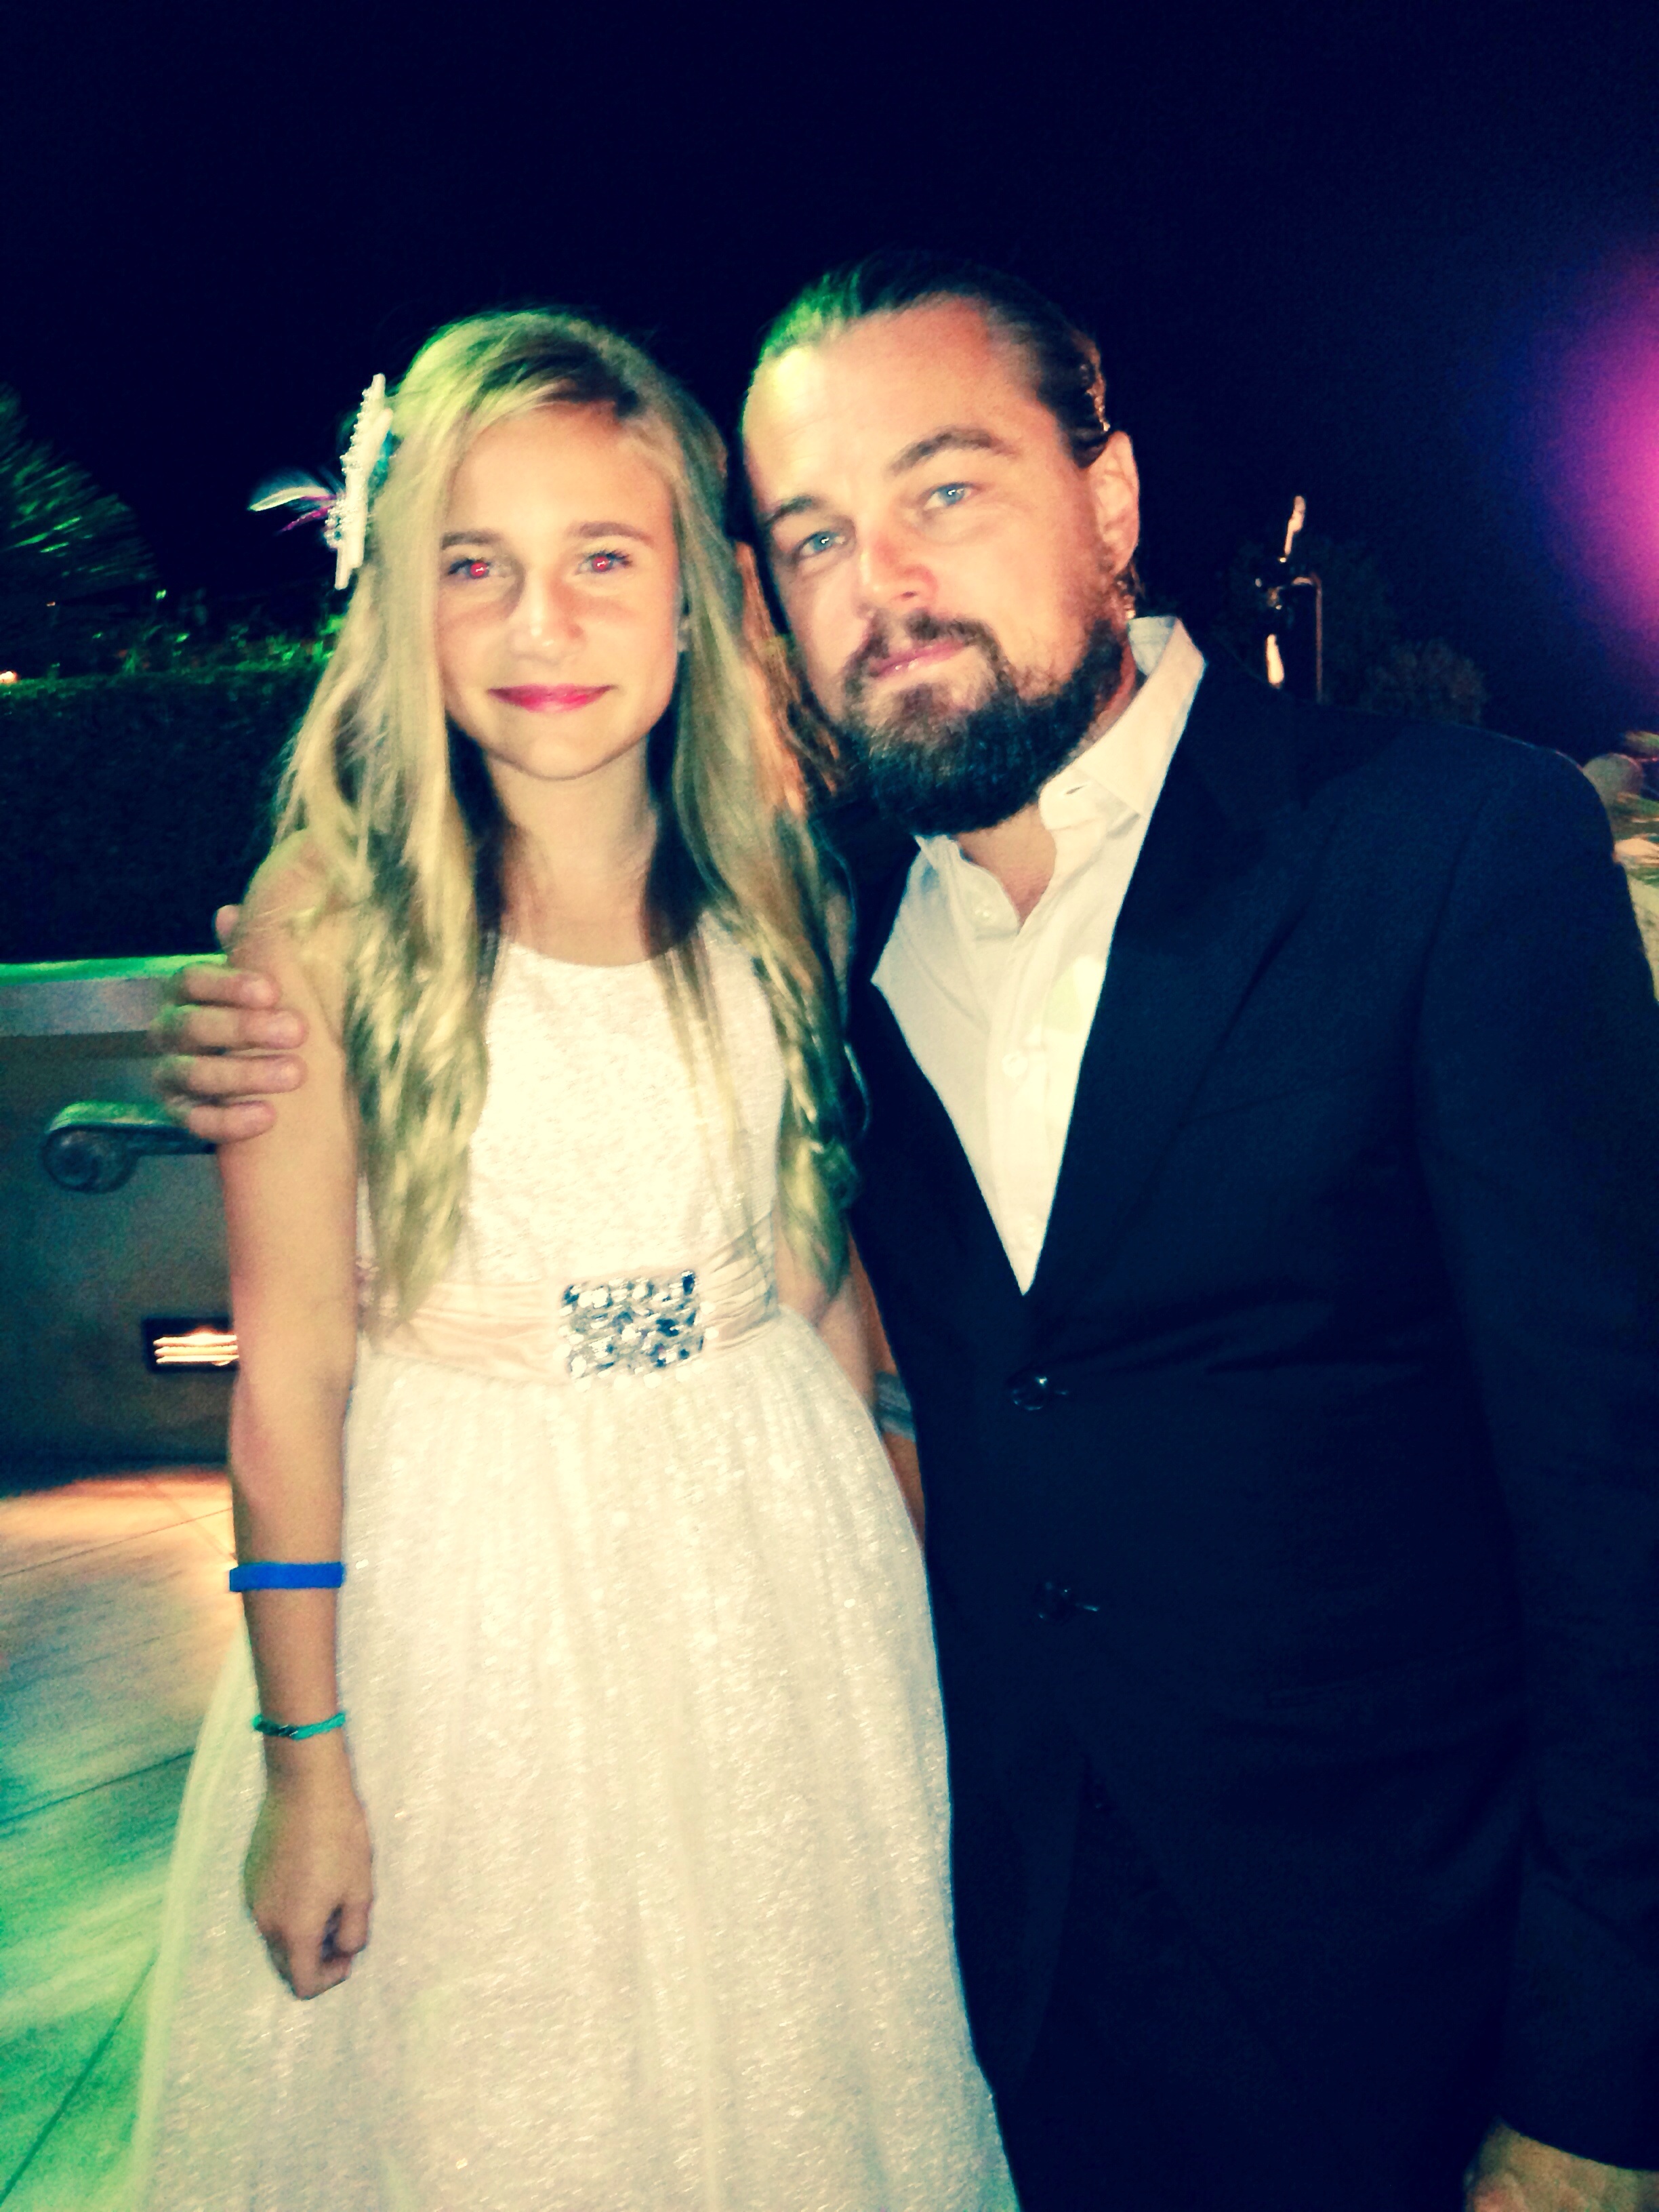 Leonardo DiCaprio and Brooke after she performed at Oceana Seachange